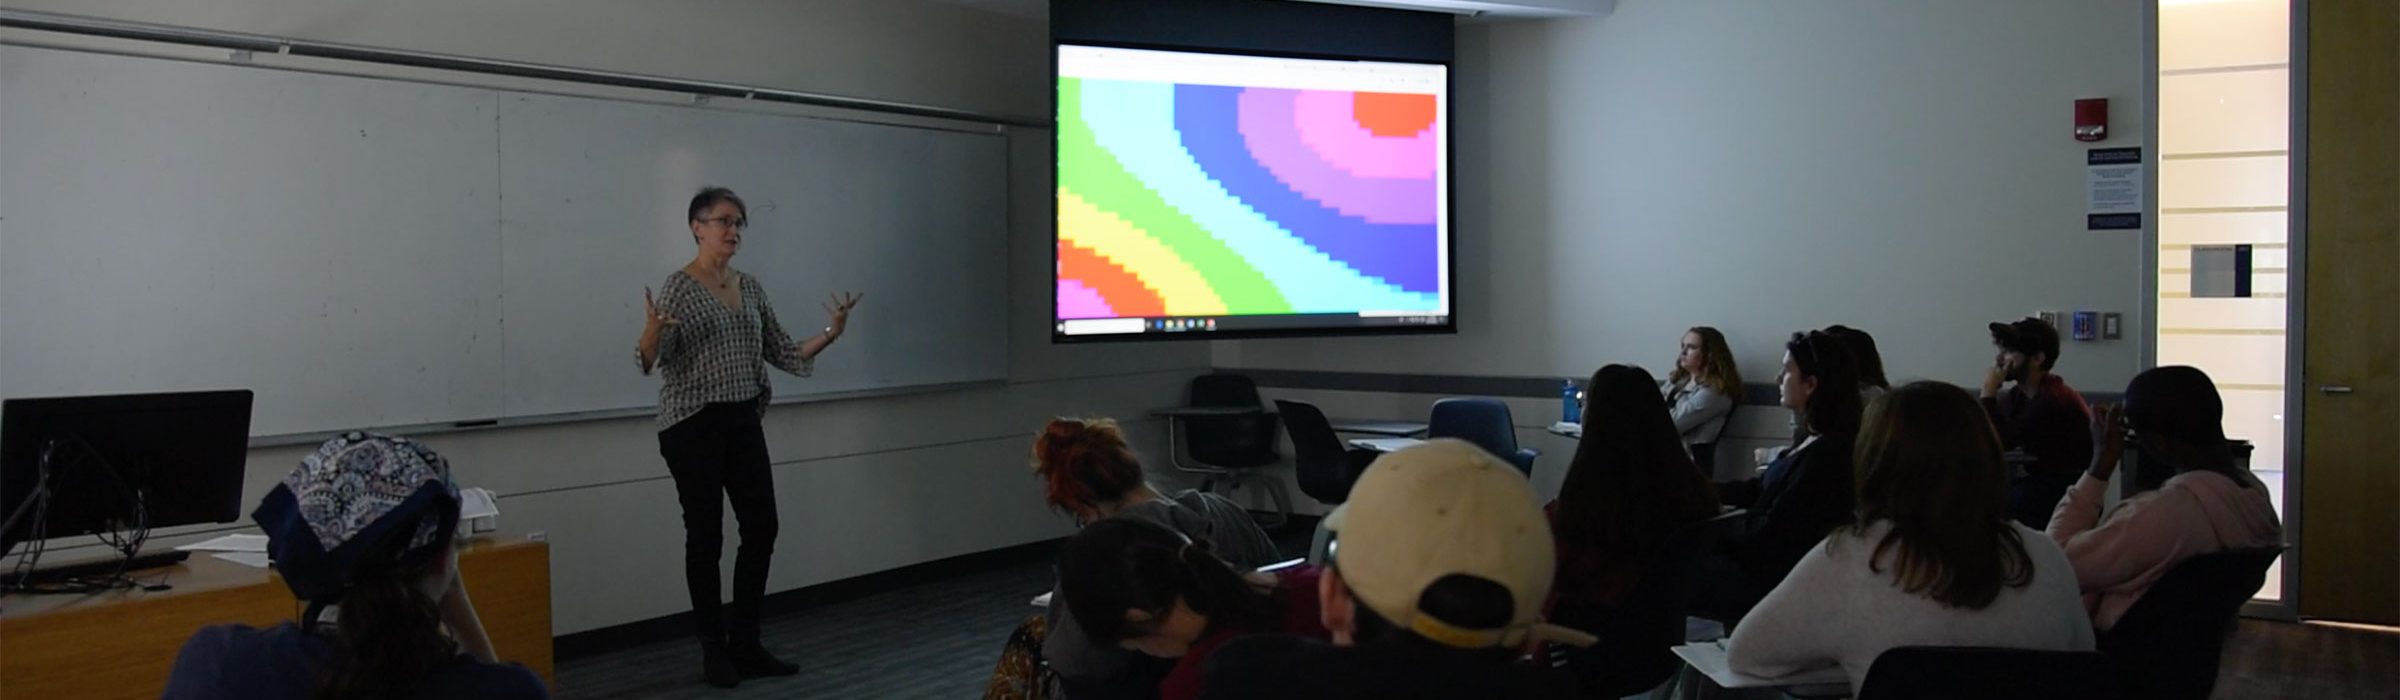 teacher in front of classroom with students and digital art image onscreen